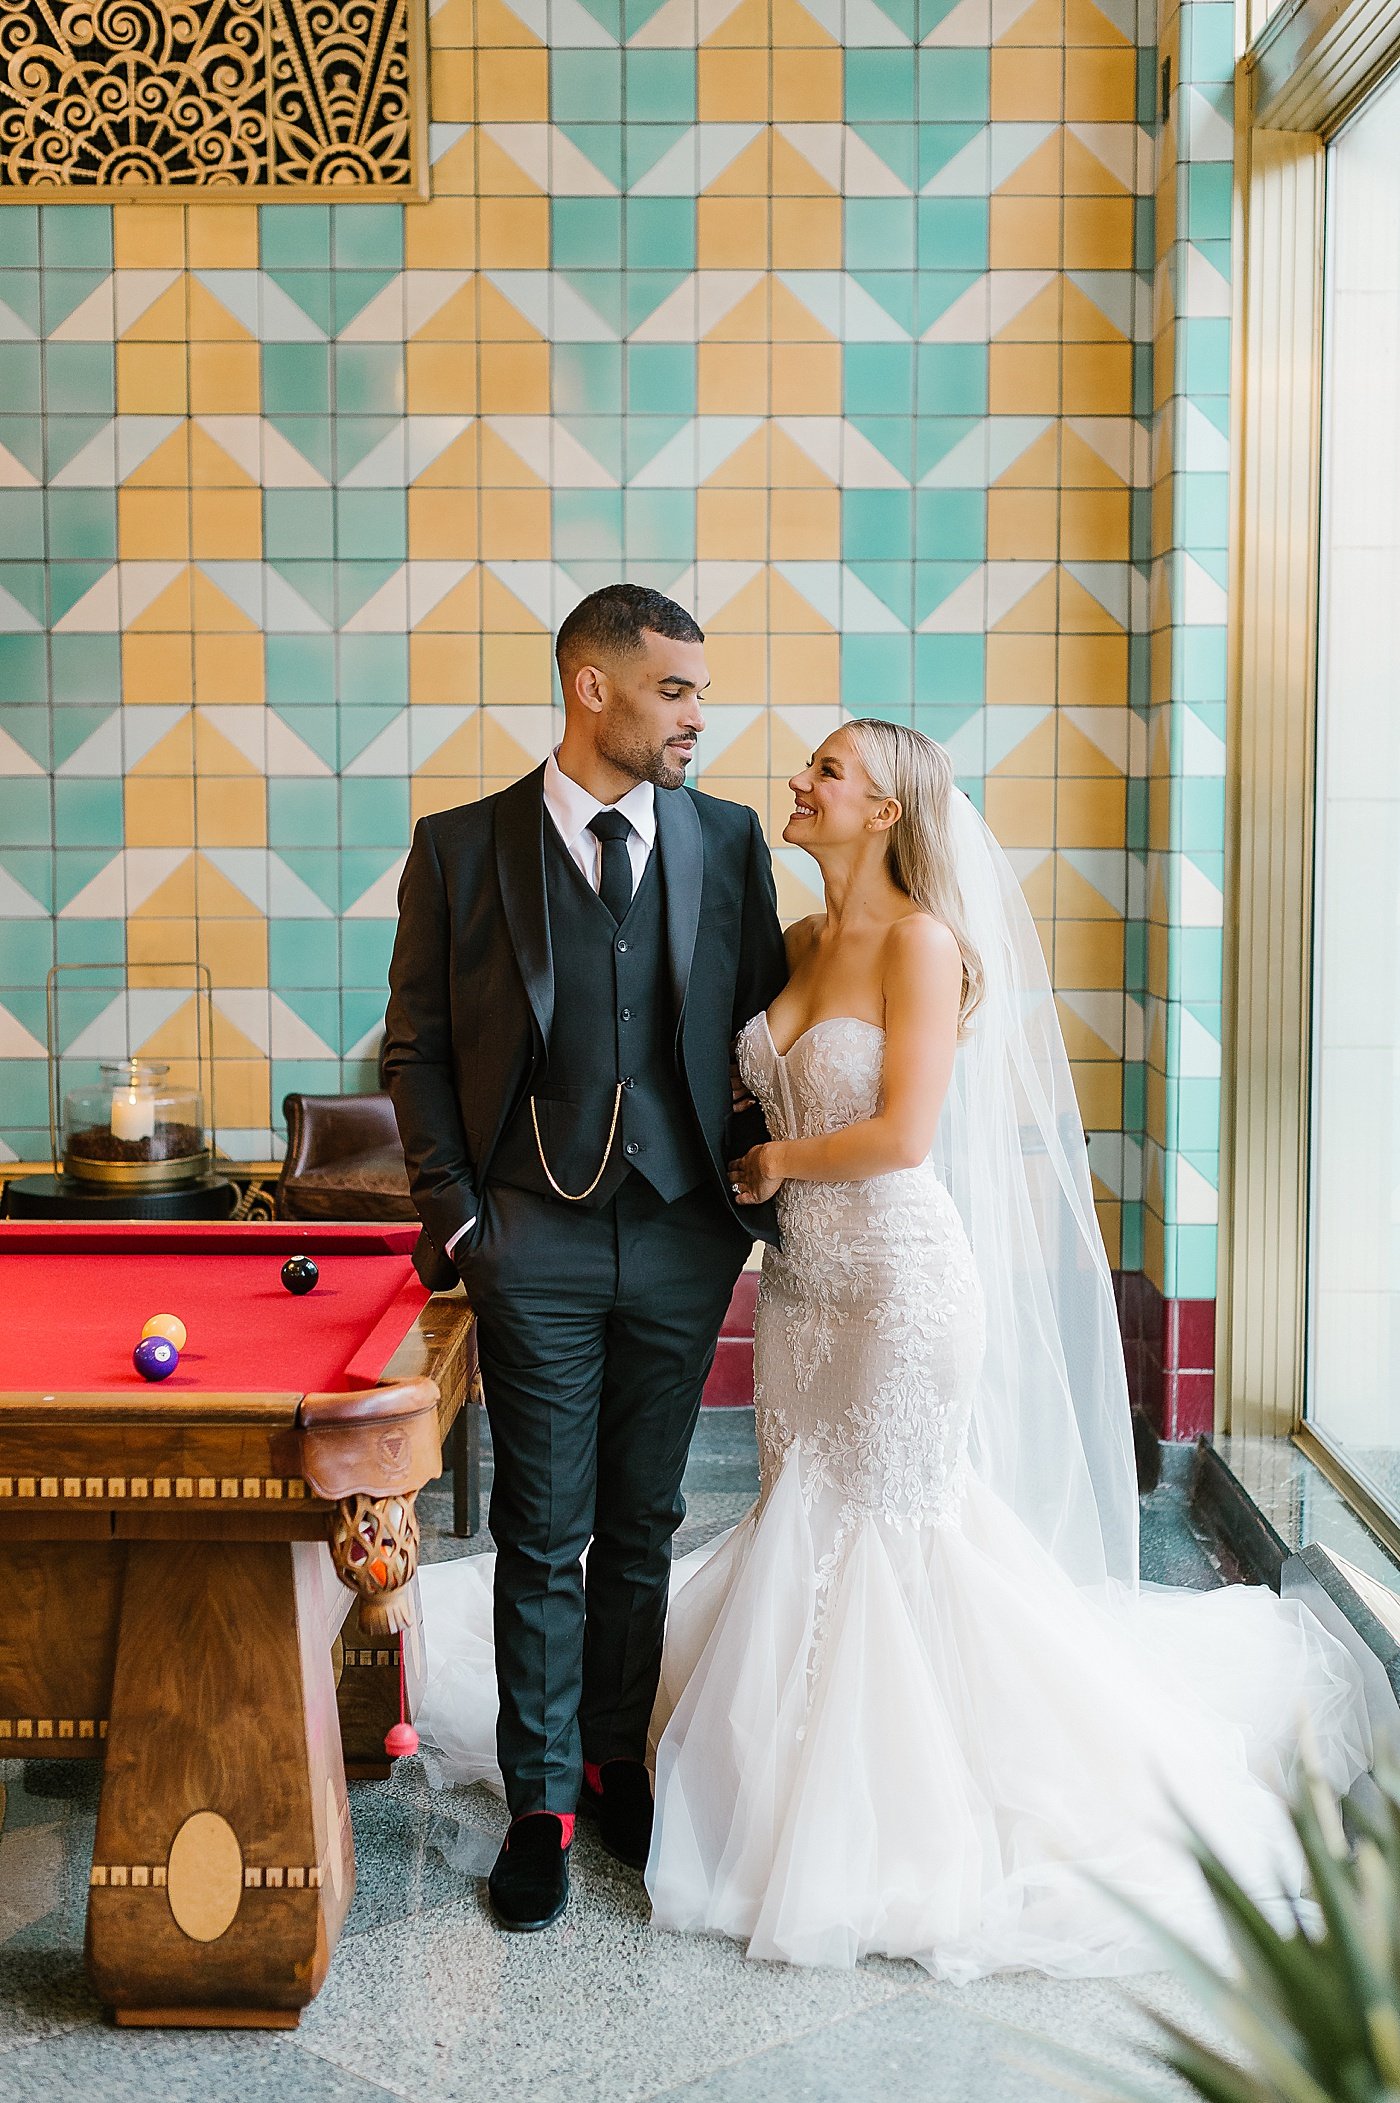 Katie and Micah's Bottleworks Indianapolis Wedding Rebecca Shehorn Photography52.jpg